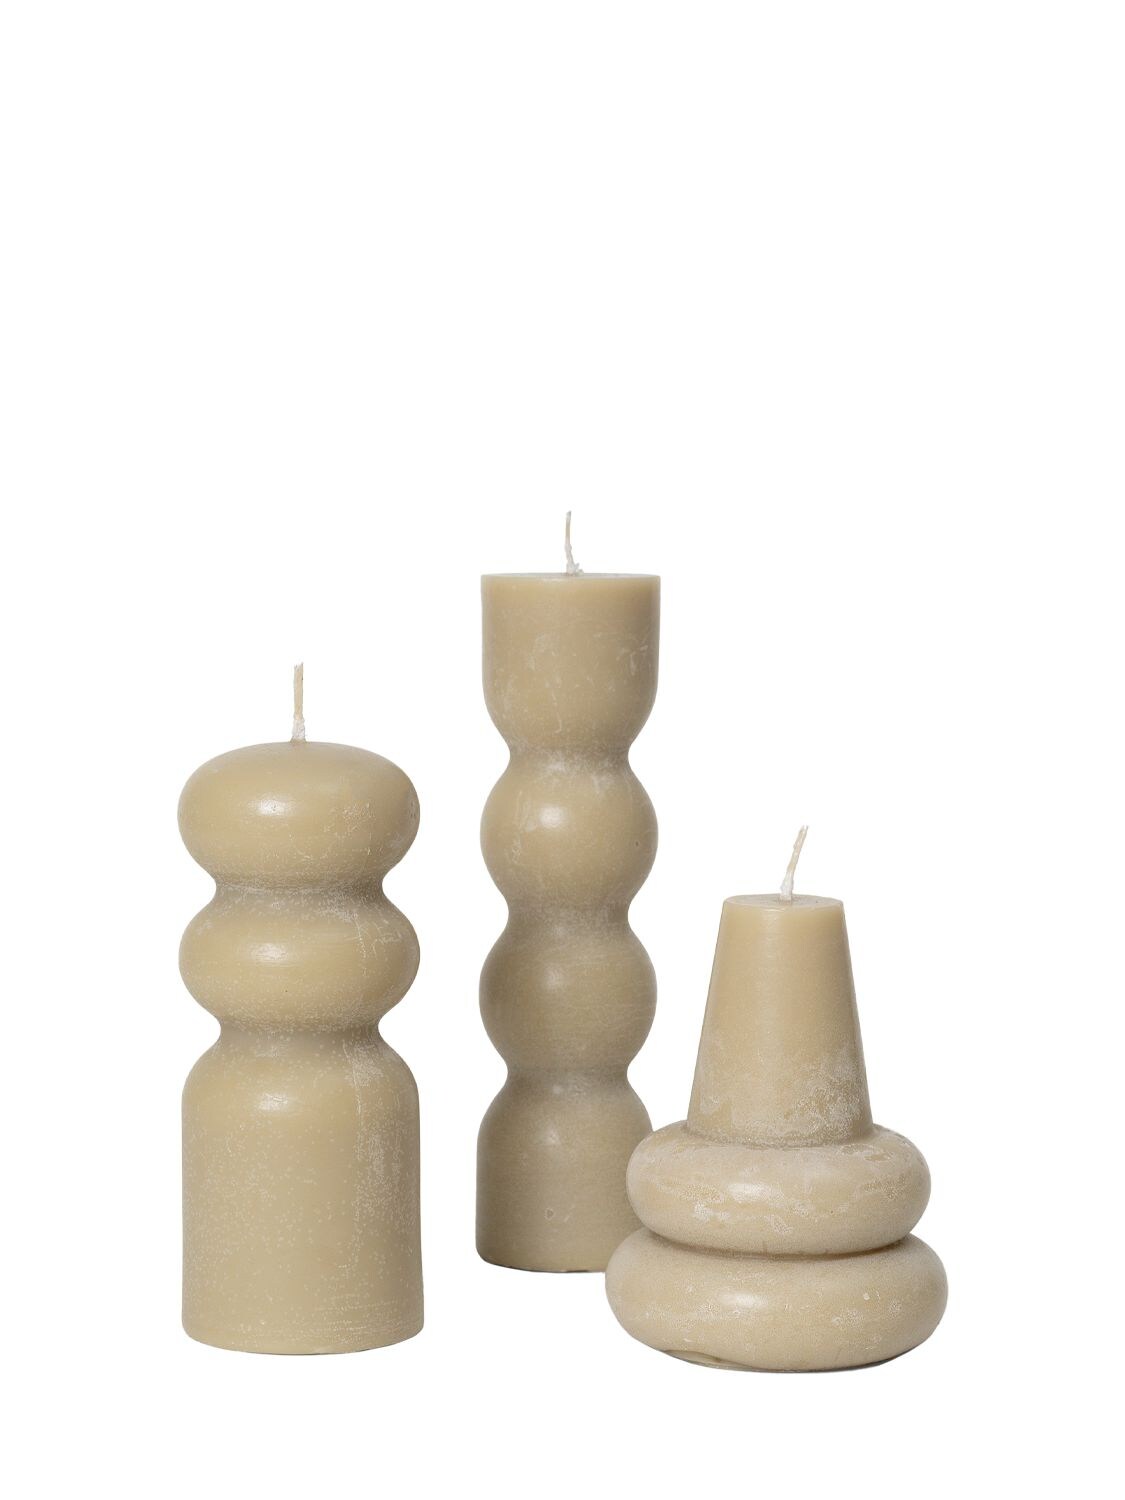 Ferm Living Torno Candles - 3个香氛蜡烛套装 In Beige